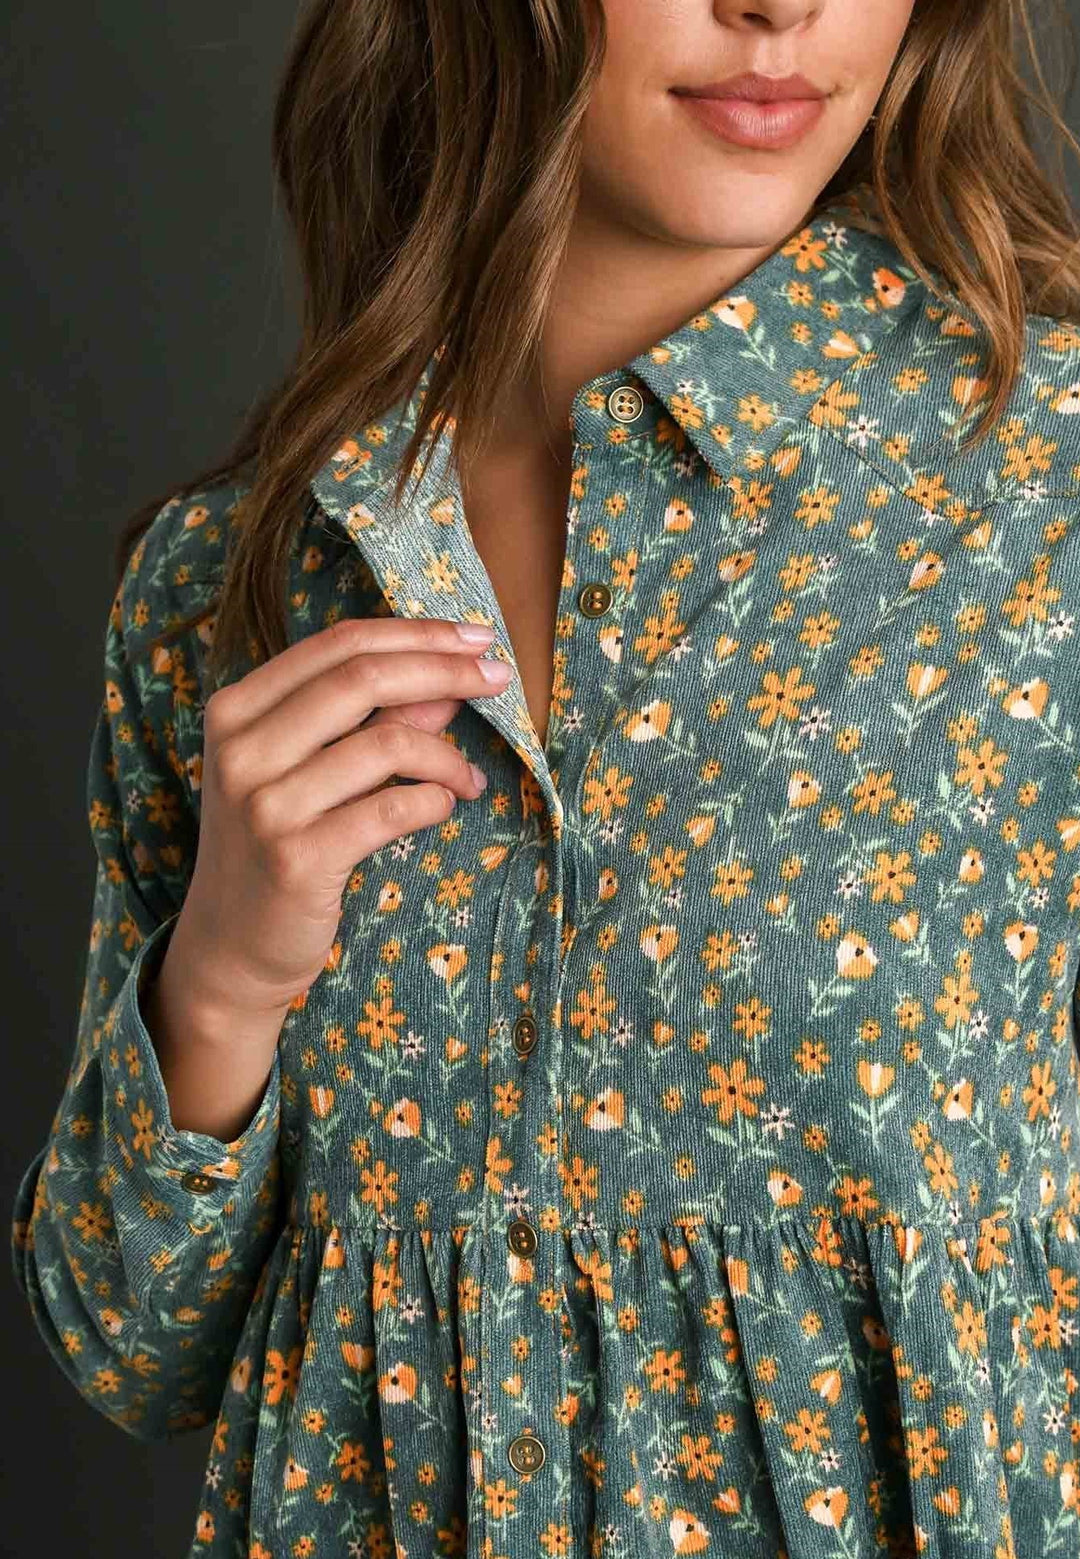 Corduroy Floral Tunic Top